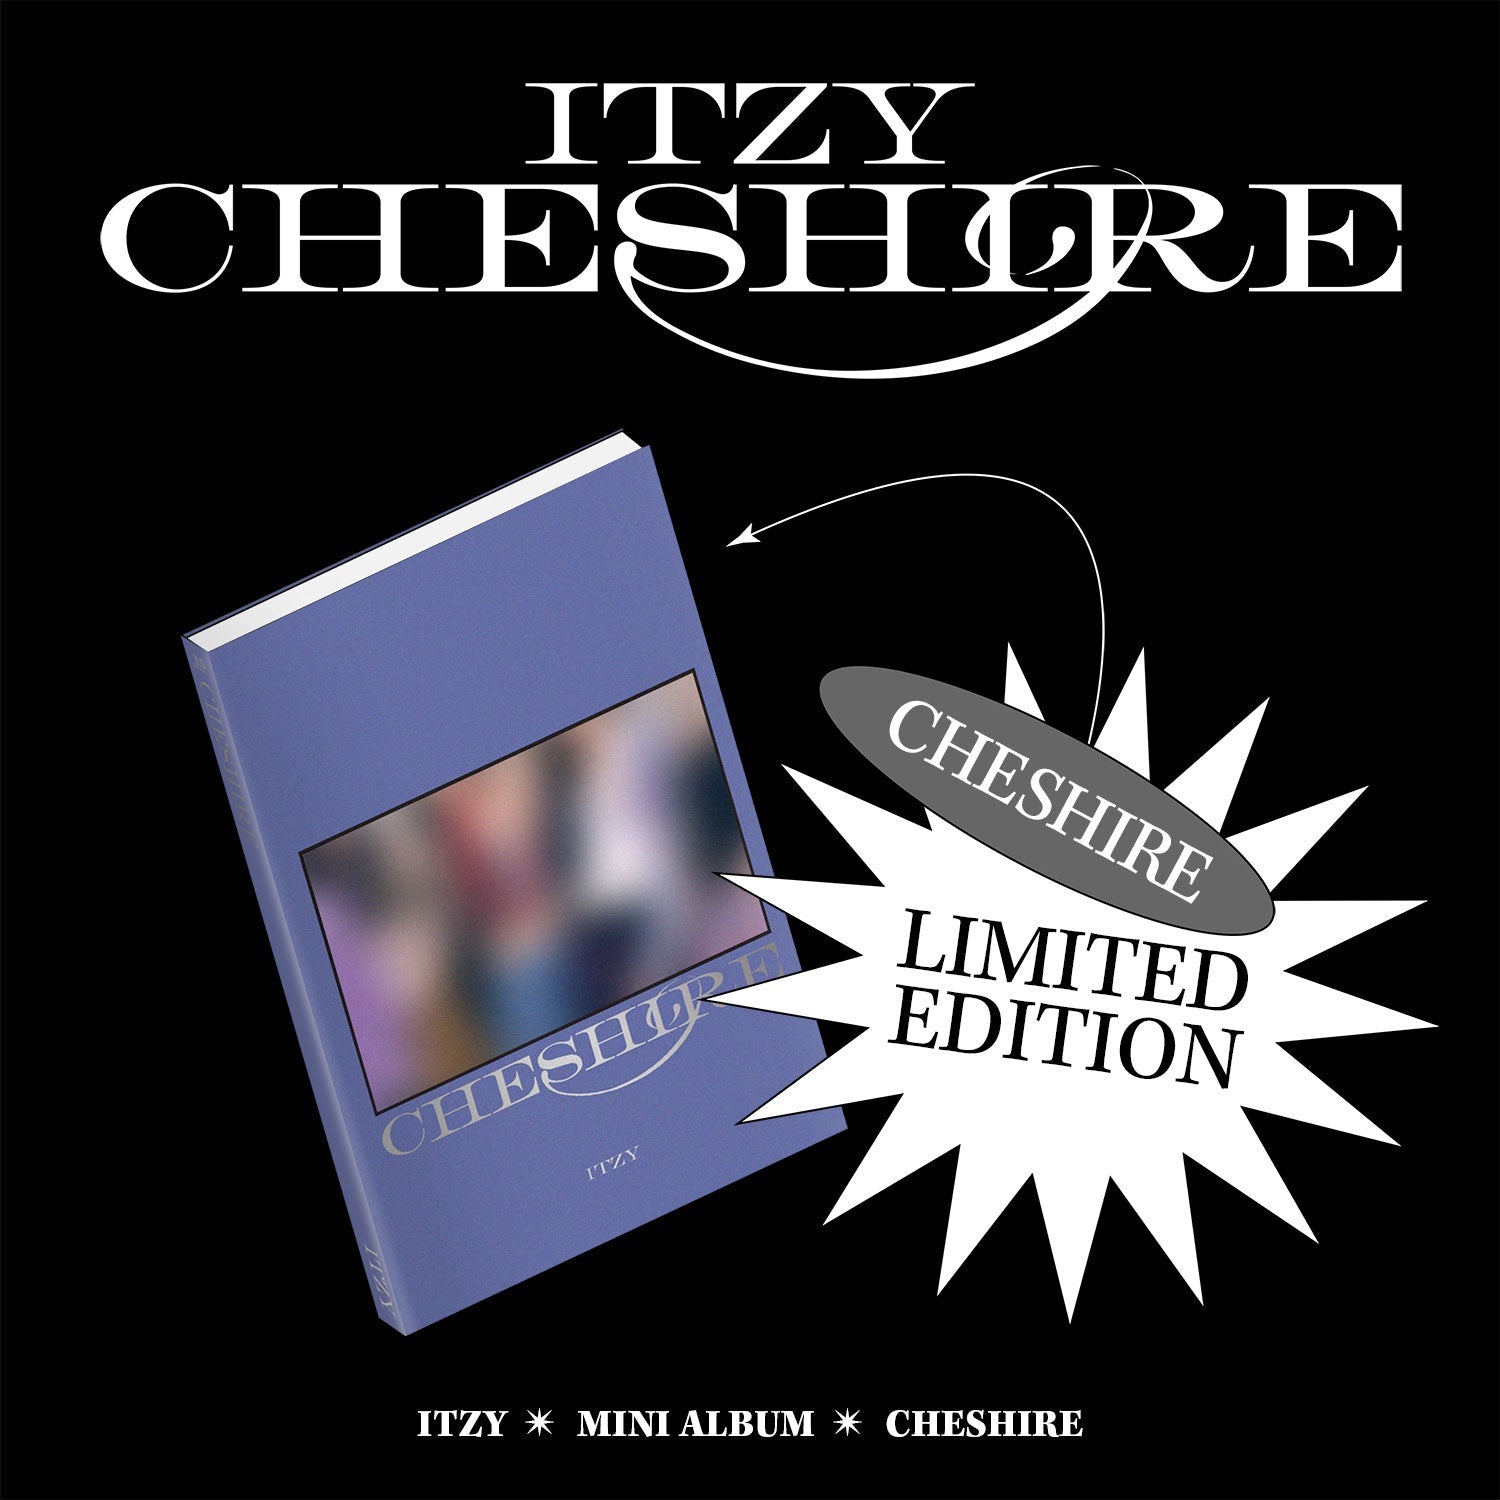 ITZY ALBUM 'CHESHIRE' LIMITED VERSION COVER